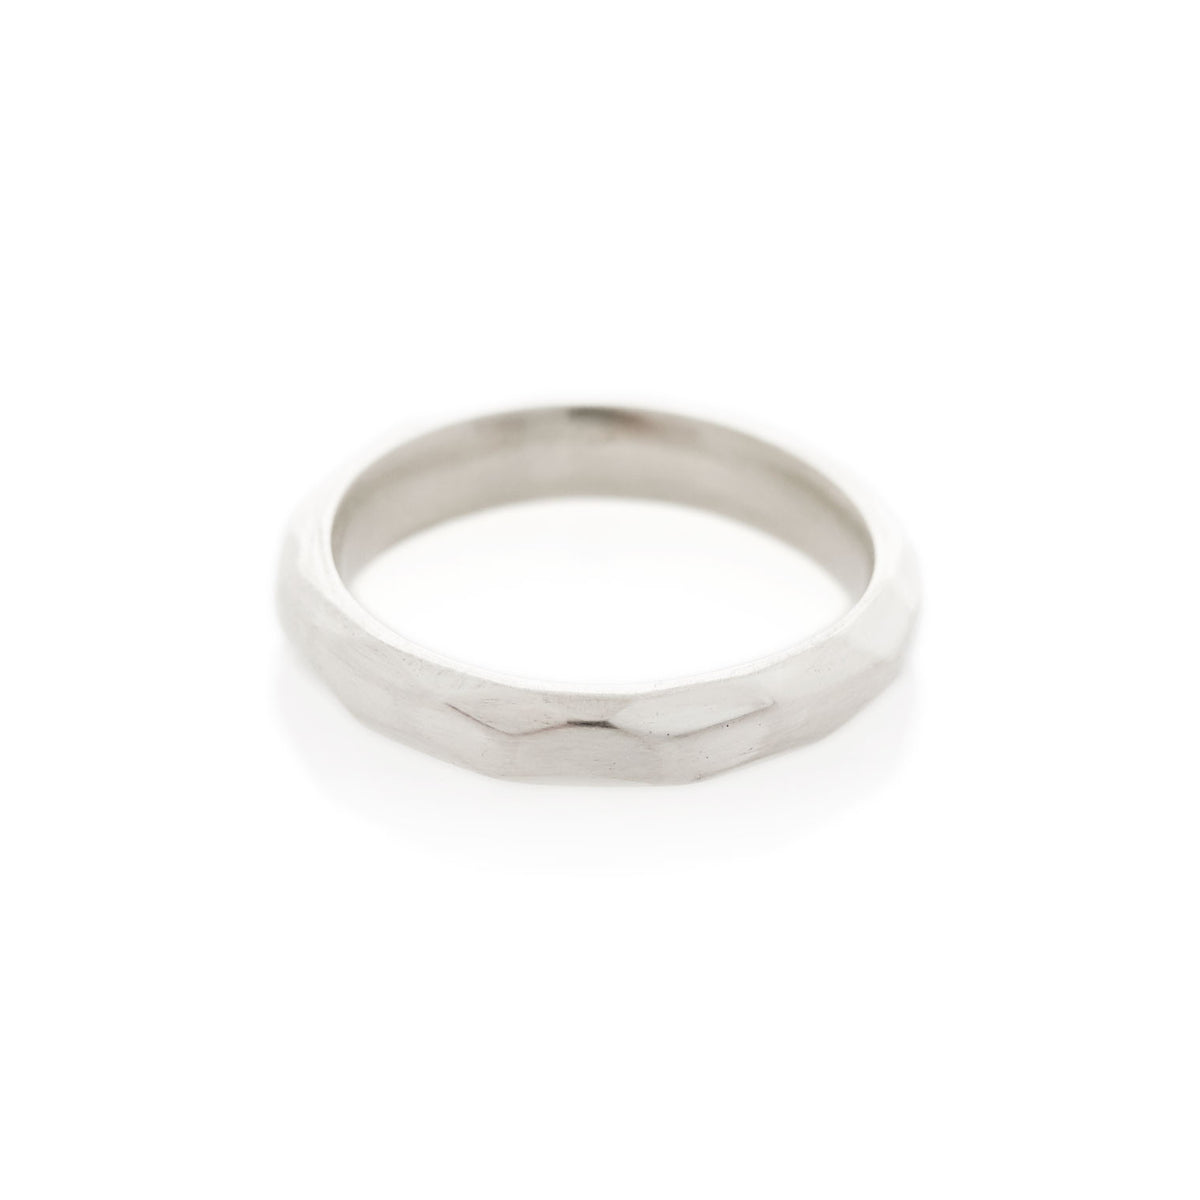 Faceted Men's Band – Dear Rae Jewellery